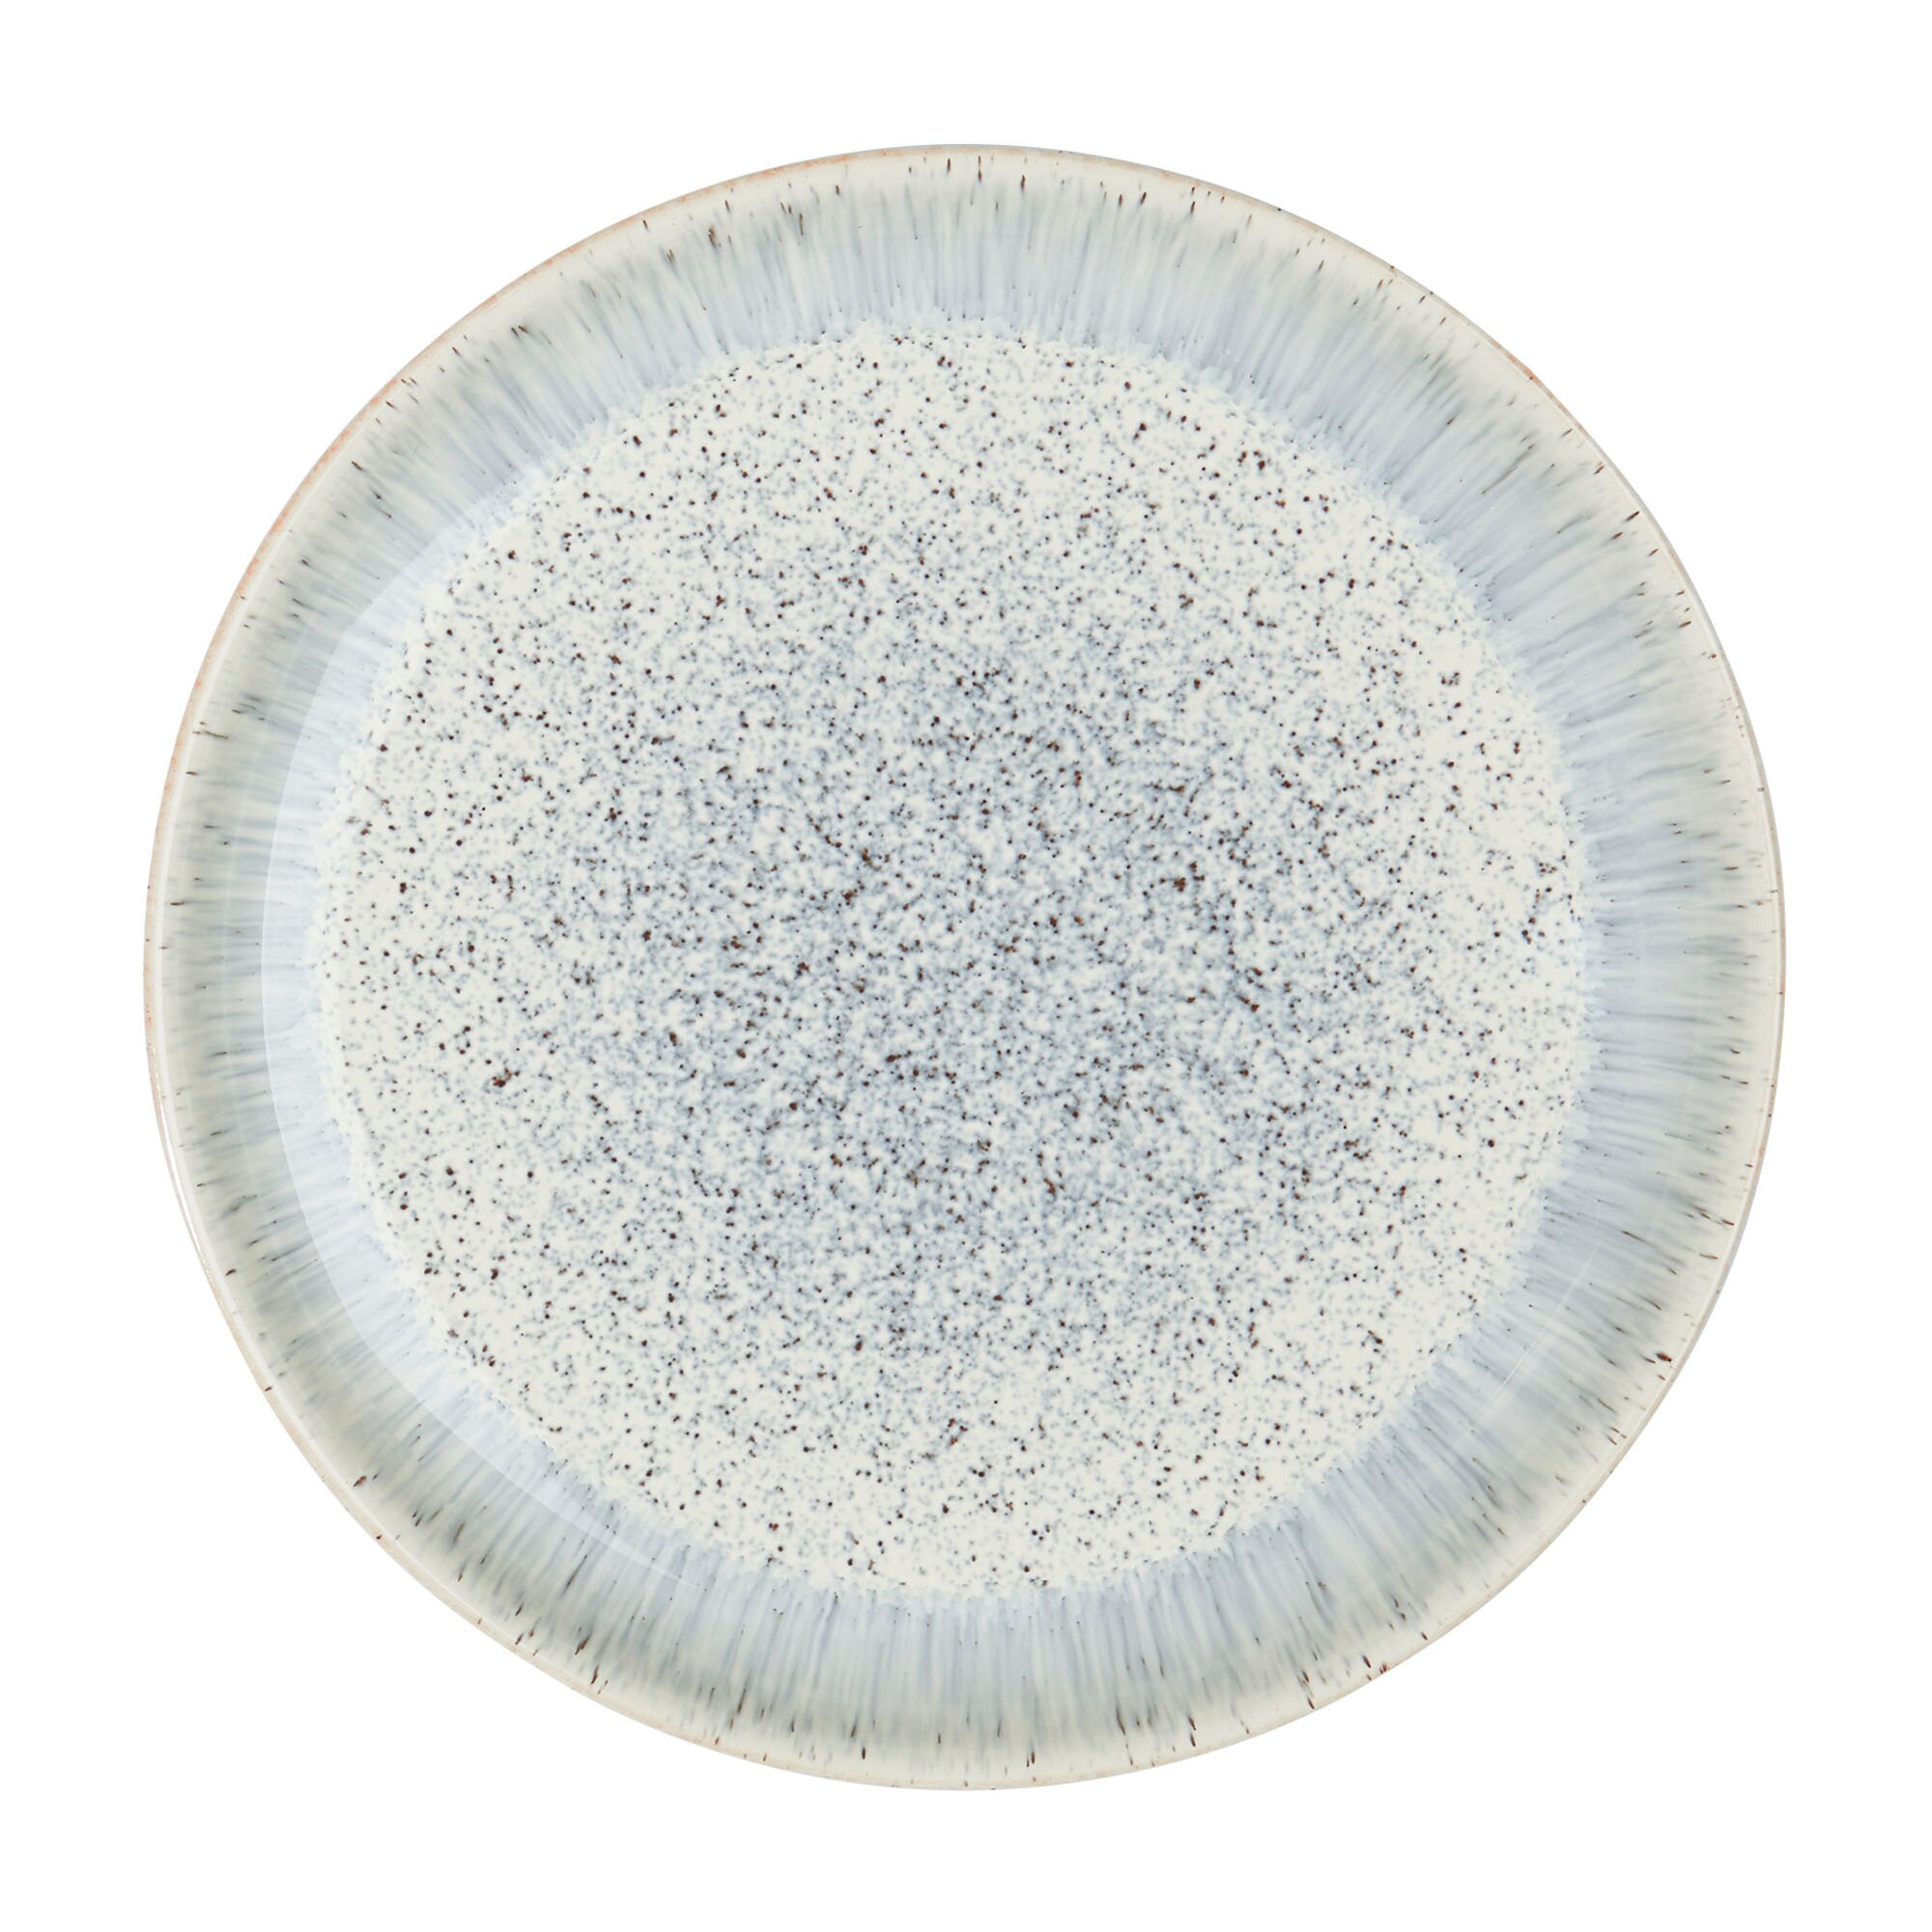 Halo Speckle Coupe Dinner Plate